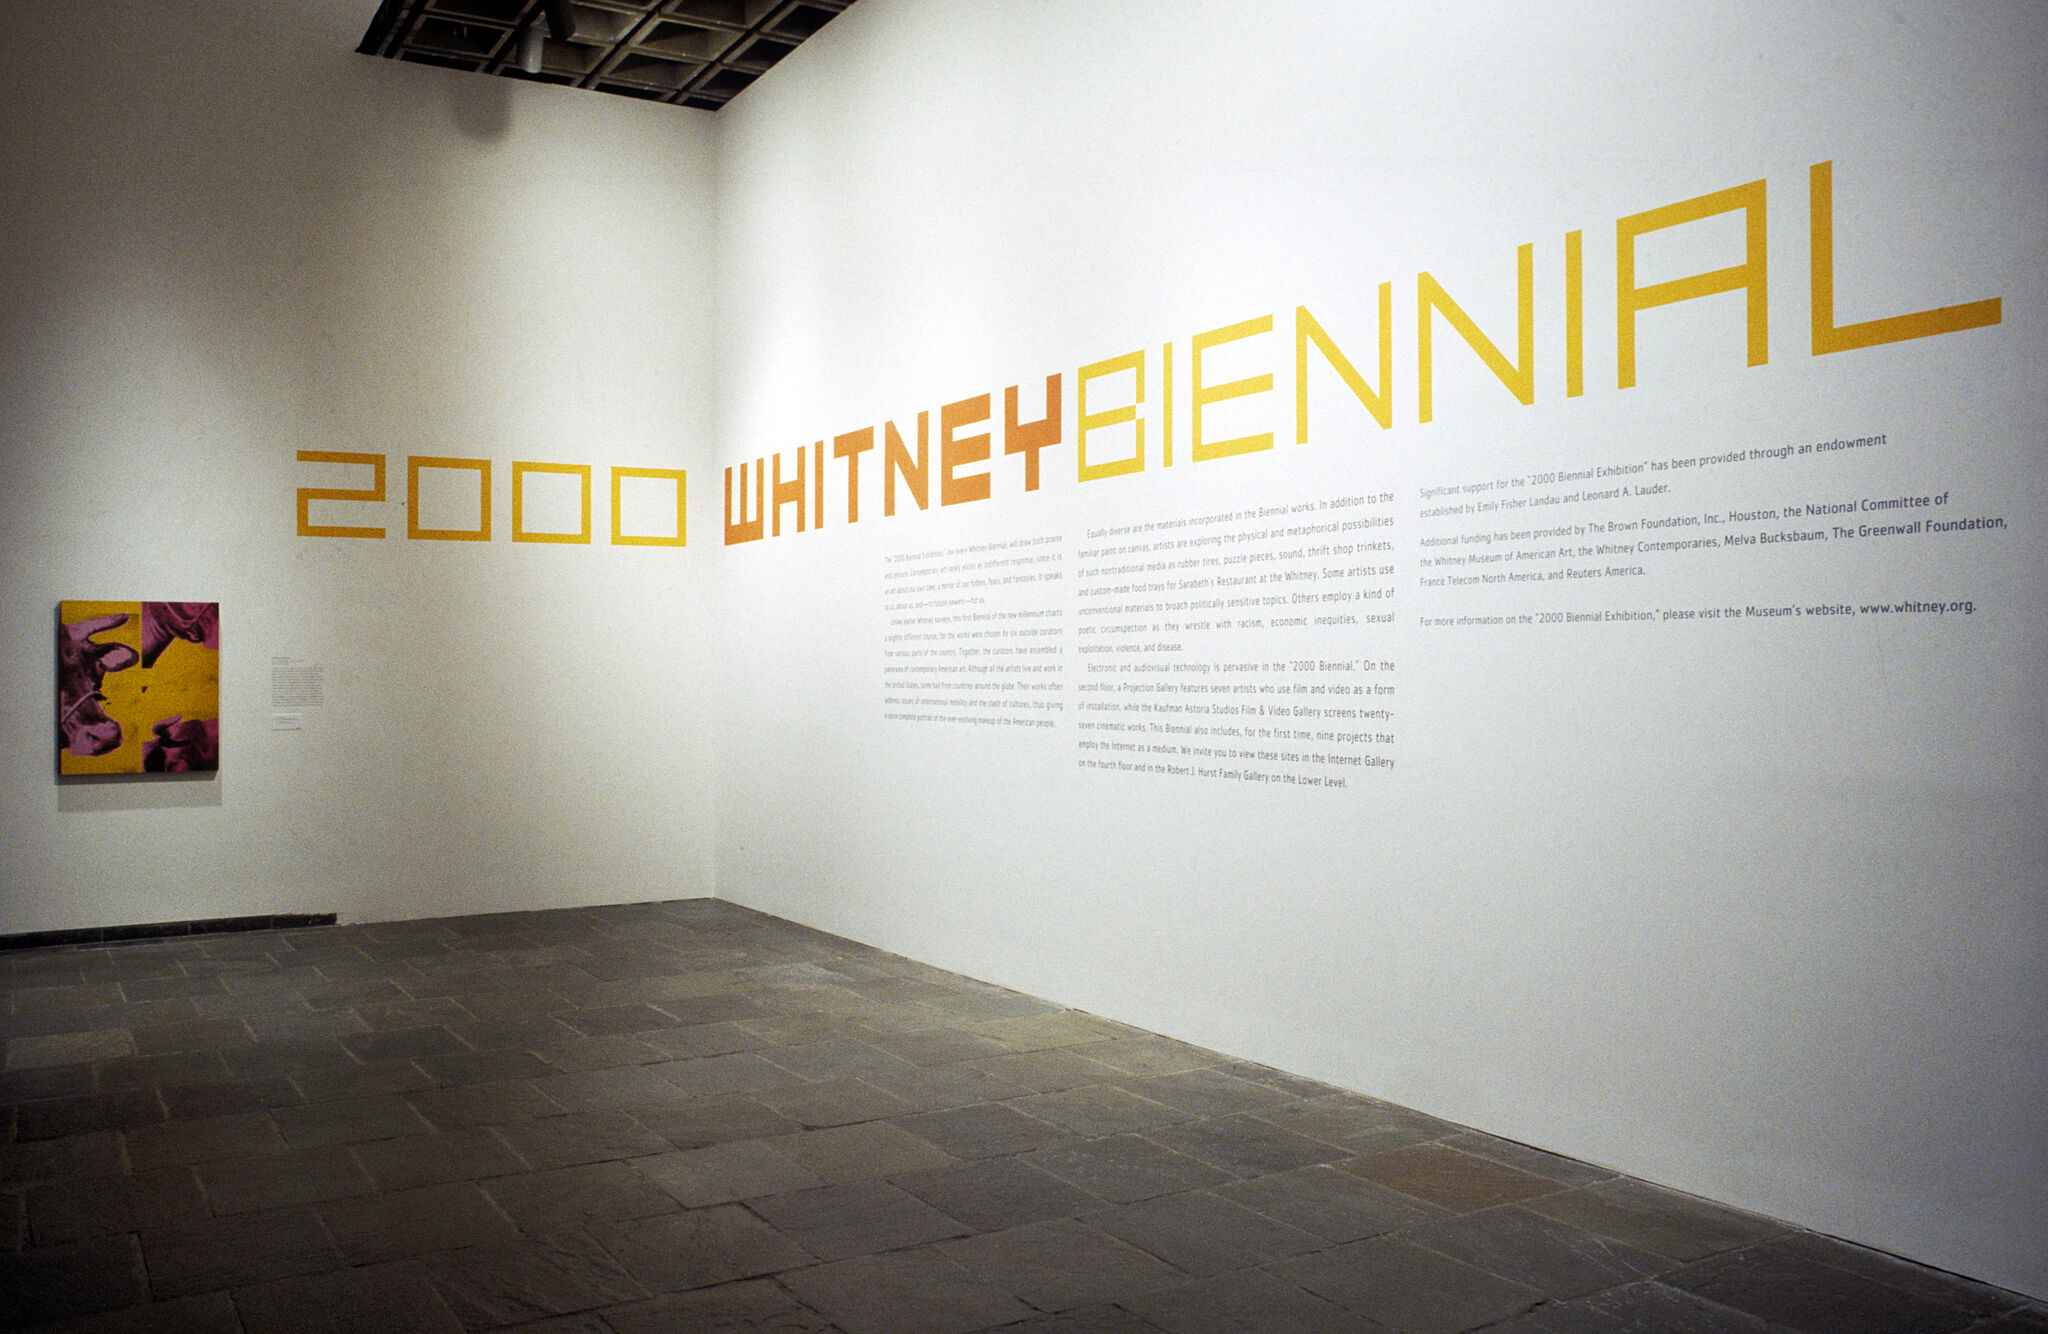 Work of art in a gallery, with the text "2000 Whitney Biennial" on the wall.